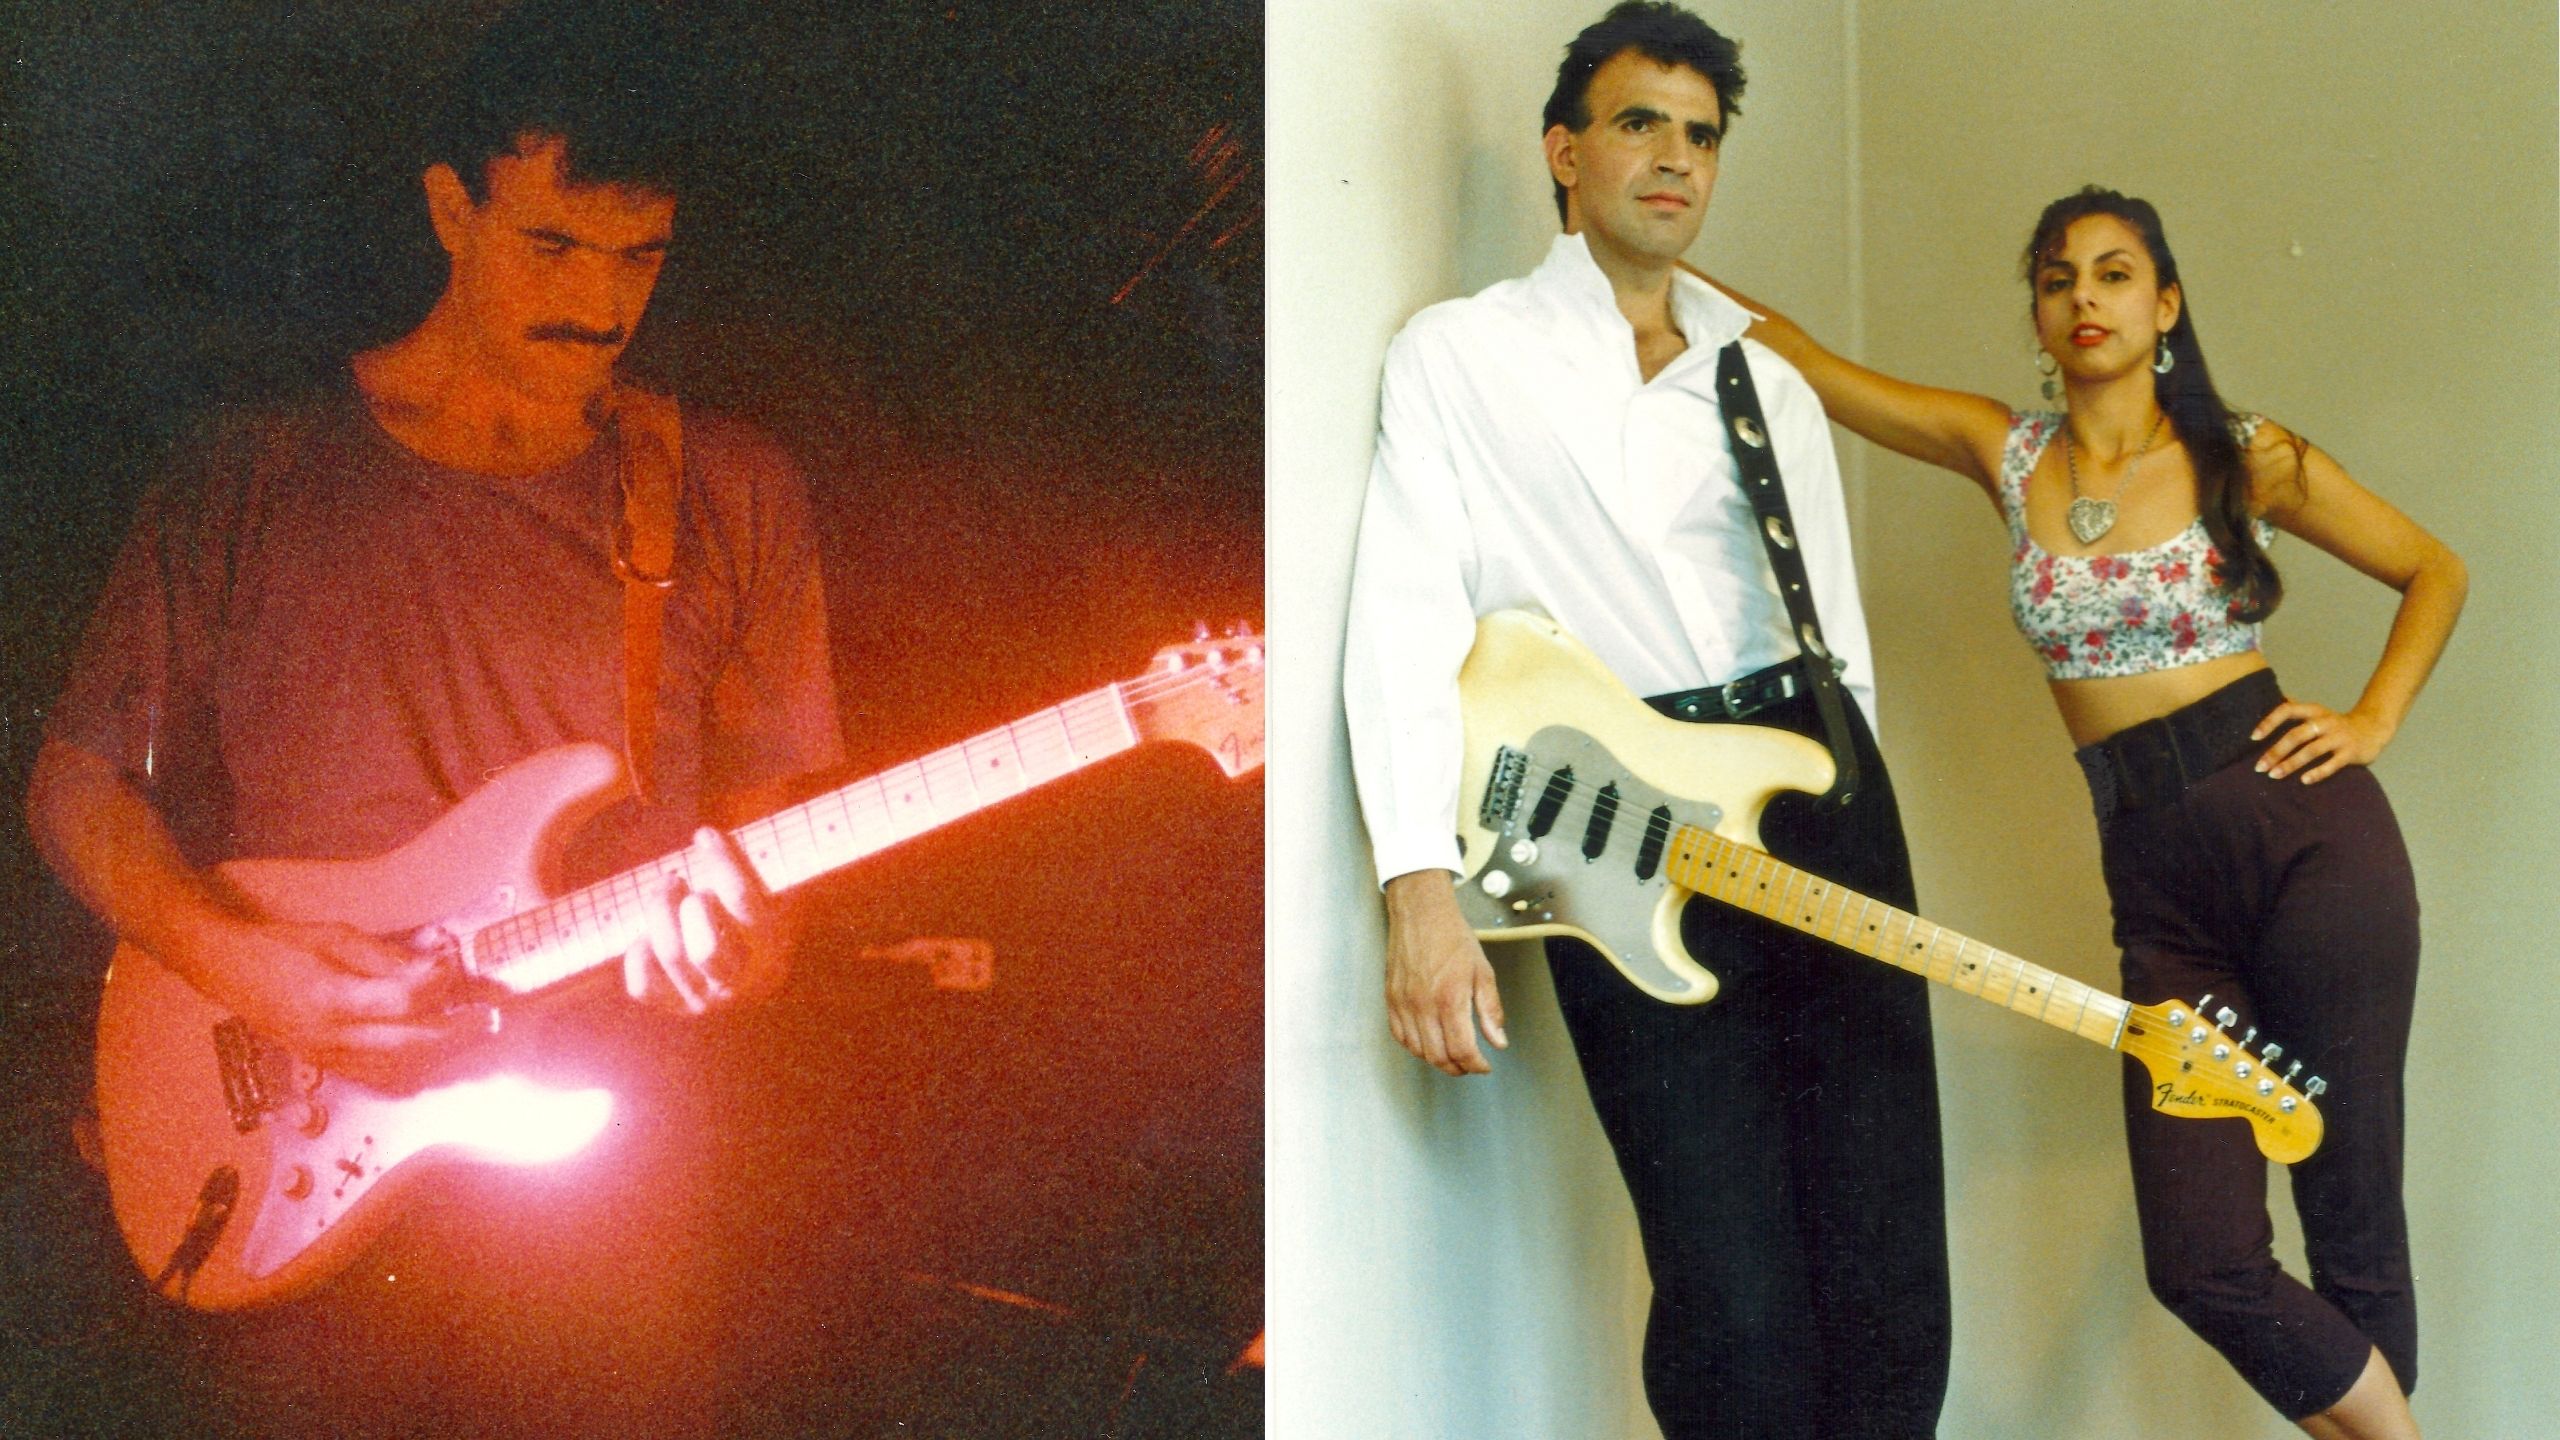 First image, Jim with his guitar. Second image, Jim and Adriana, in a promo shot for their band. (Source: supplied). 